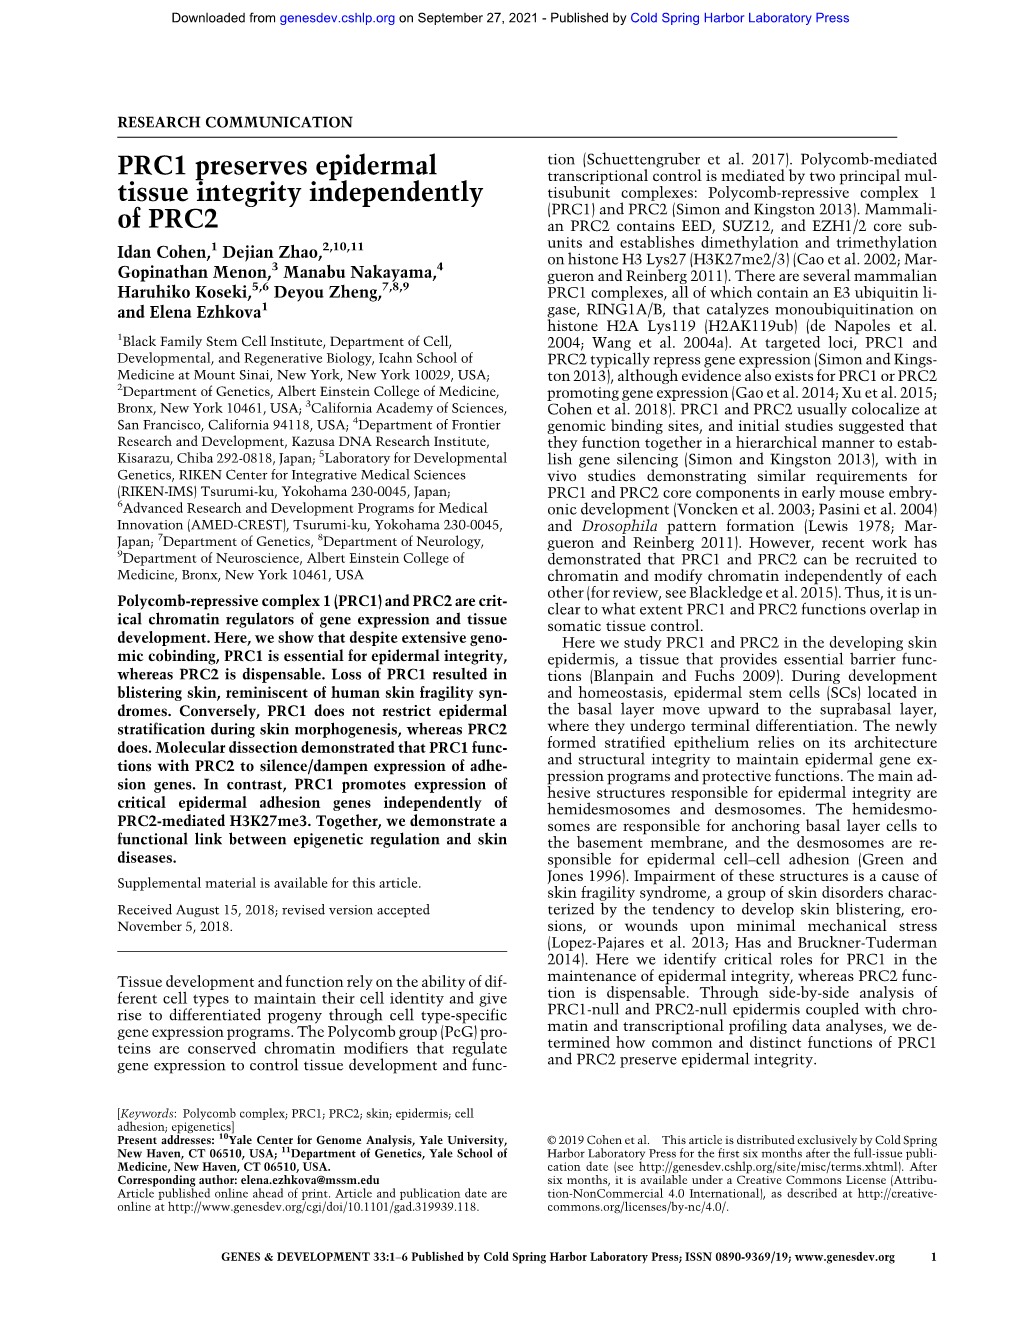 PRC1 Preserves Epidermal Tissue Integrity Independently of PRC2